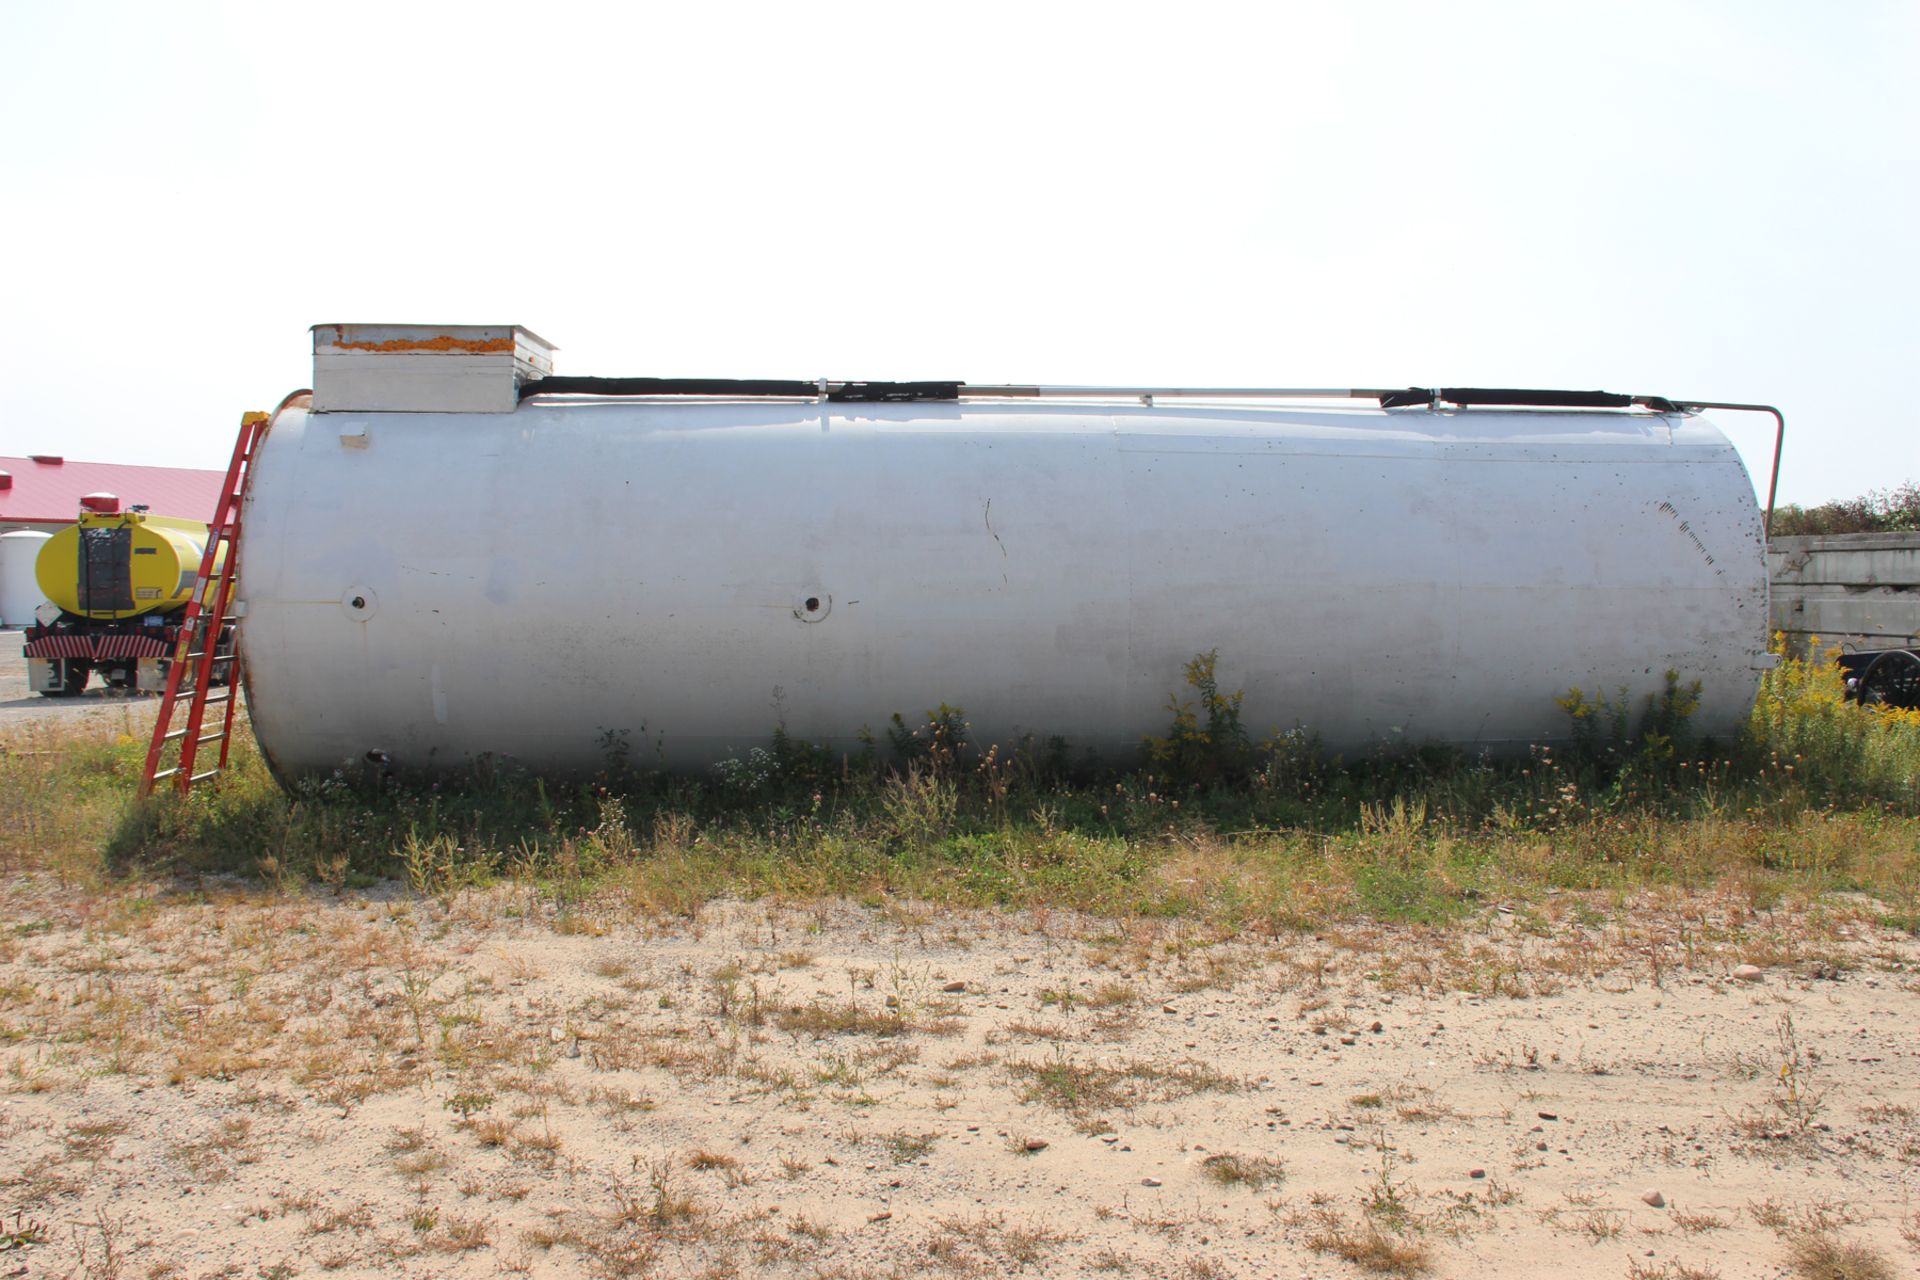 MUELLER 15,000 GALLON JACKETED SILO, S/N D-8745-3, HORRIZONTAL AGITATION (LOCATED IN MIO, MICHIGAN) - Image 2 of 23